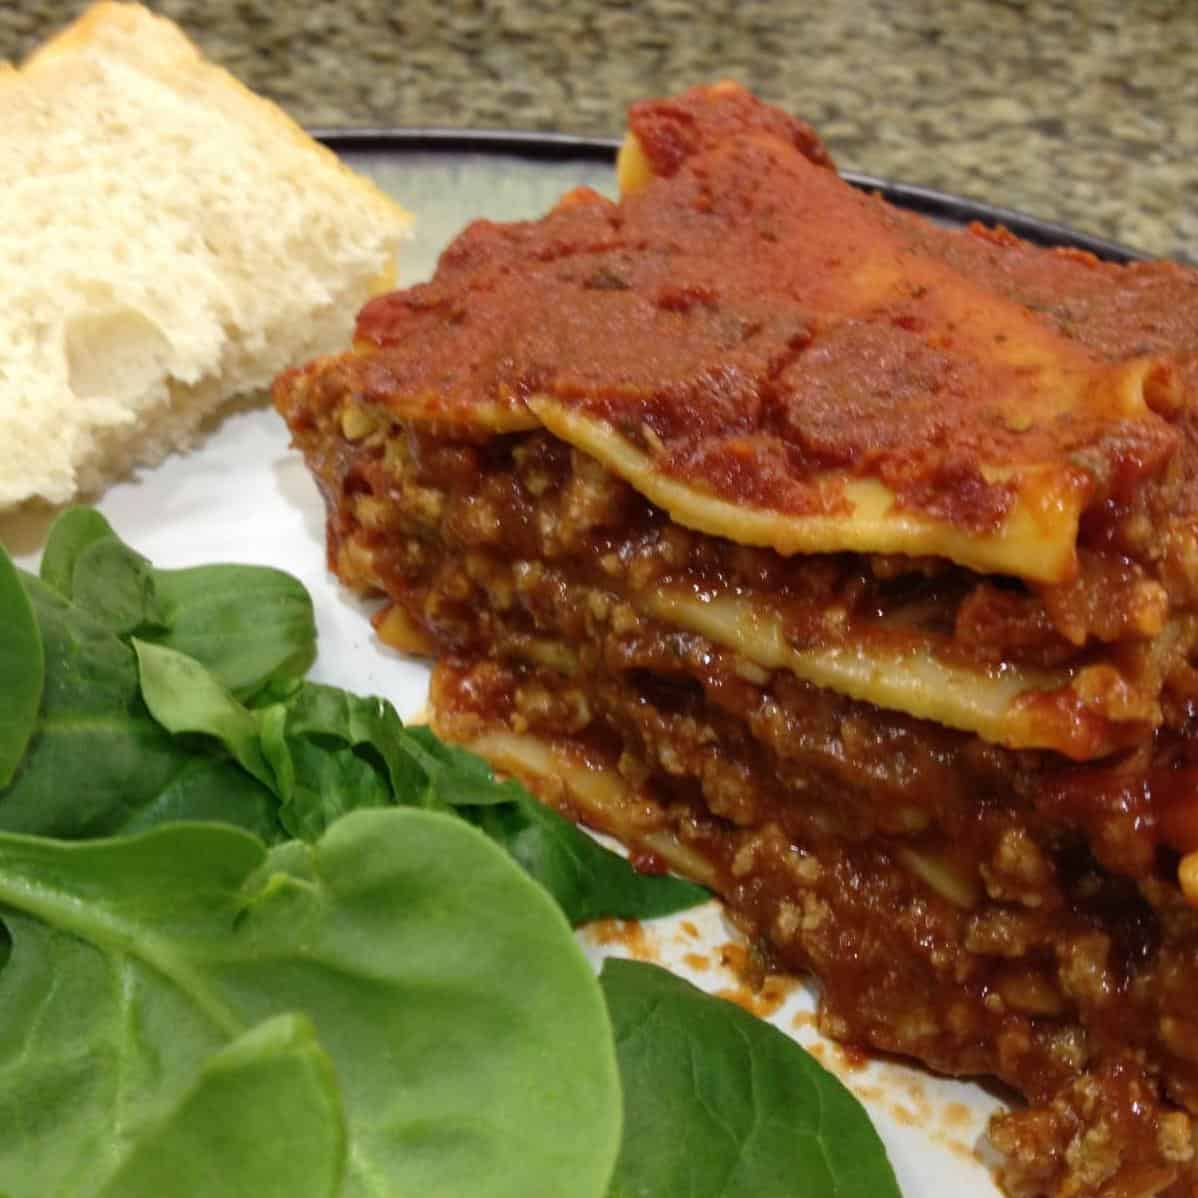  Layers upon layers of tomato sauce, cheese, and ground beef will make your taste buds dance.